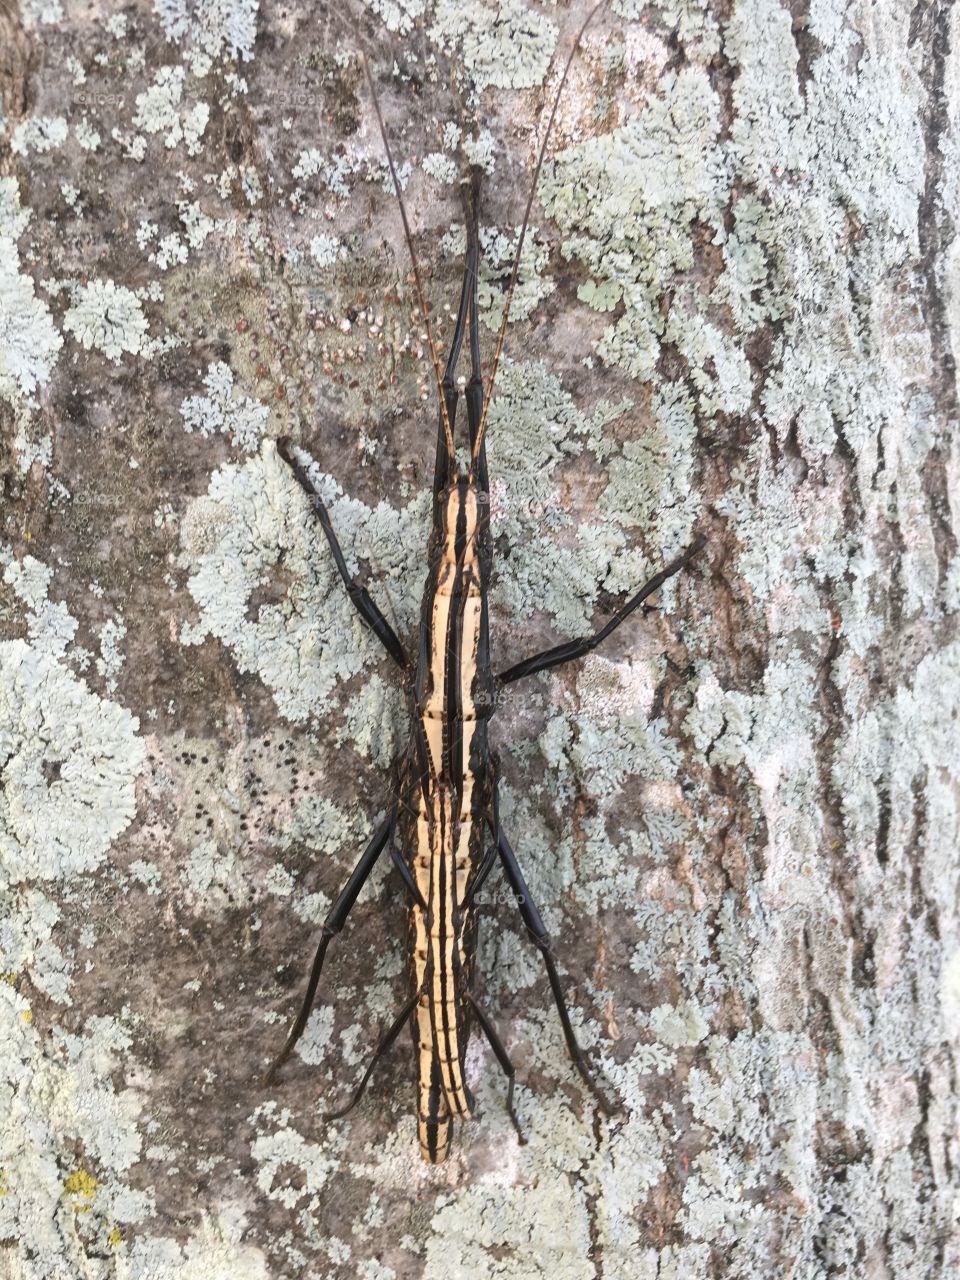 Two insects sitting on top of each other on the tree. 